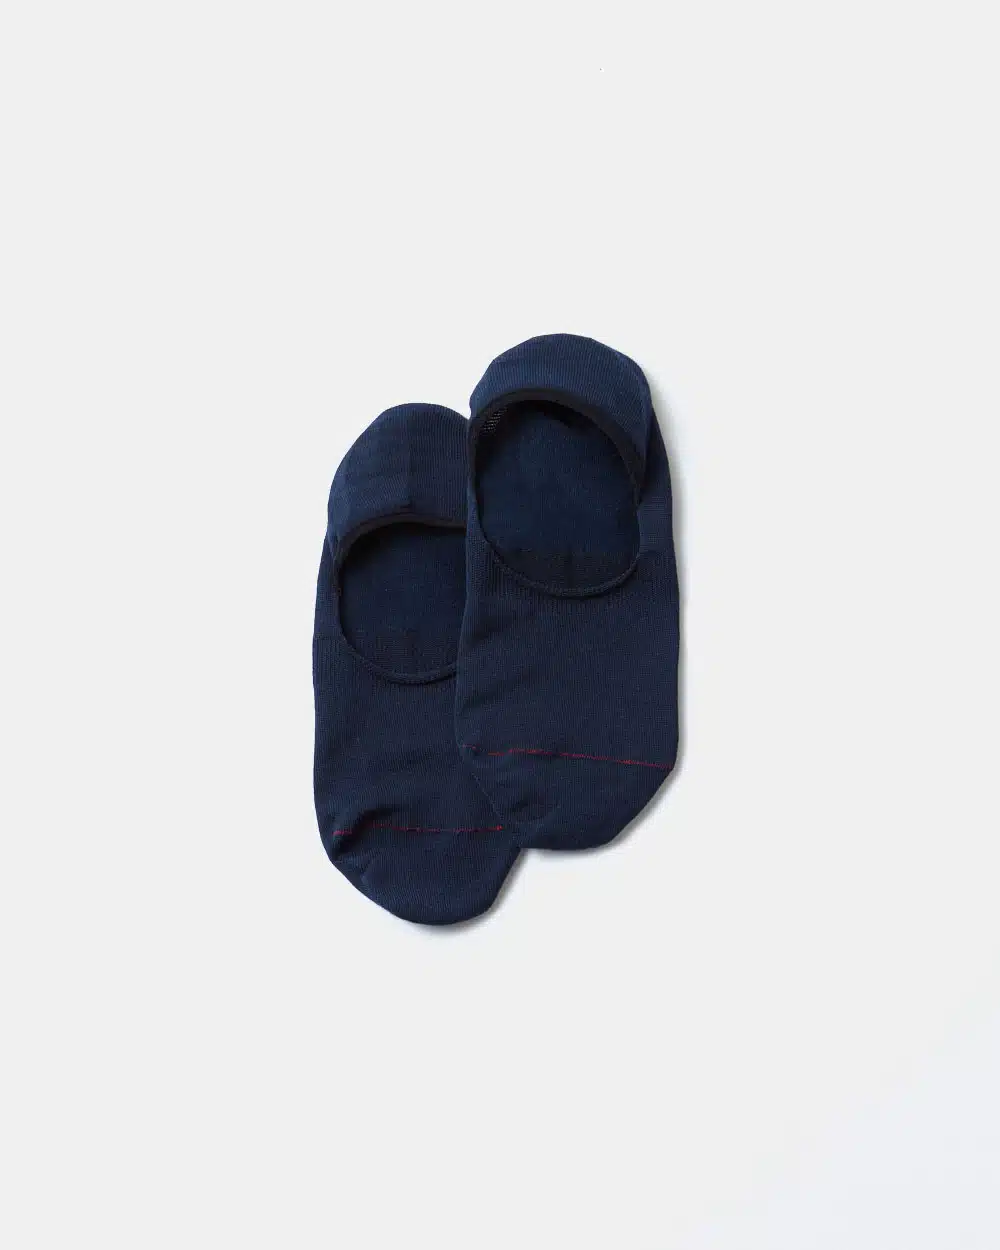 RoToTo High Gauge Foot Cover - Navy